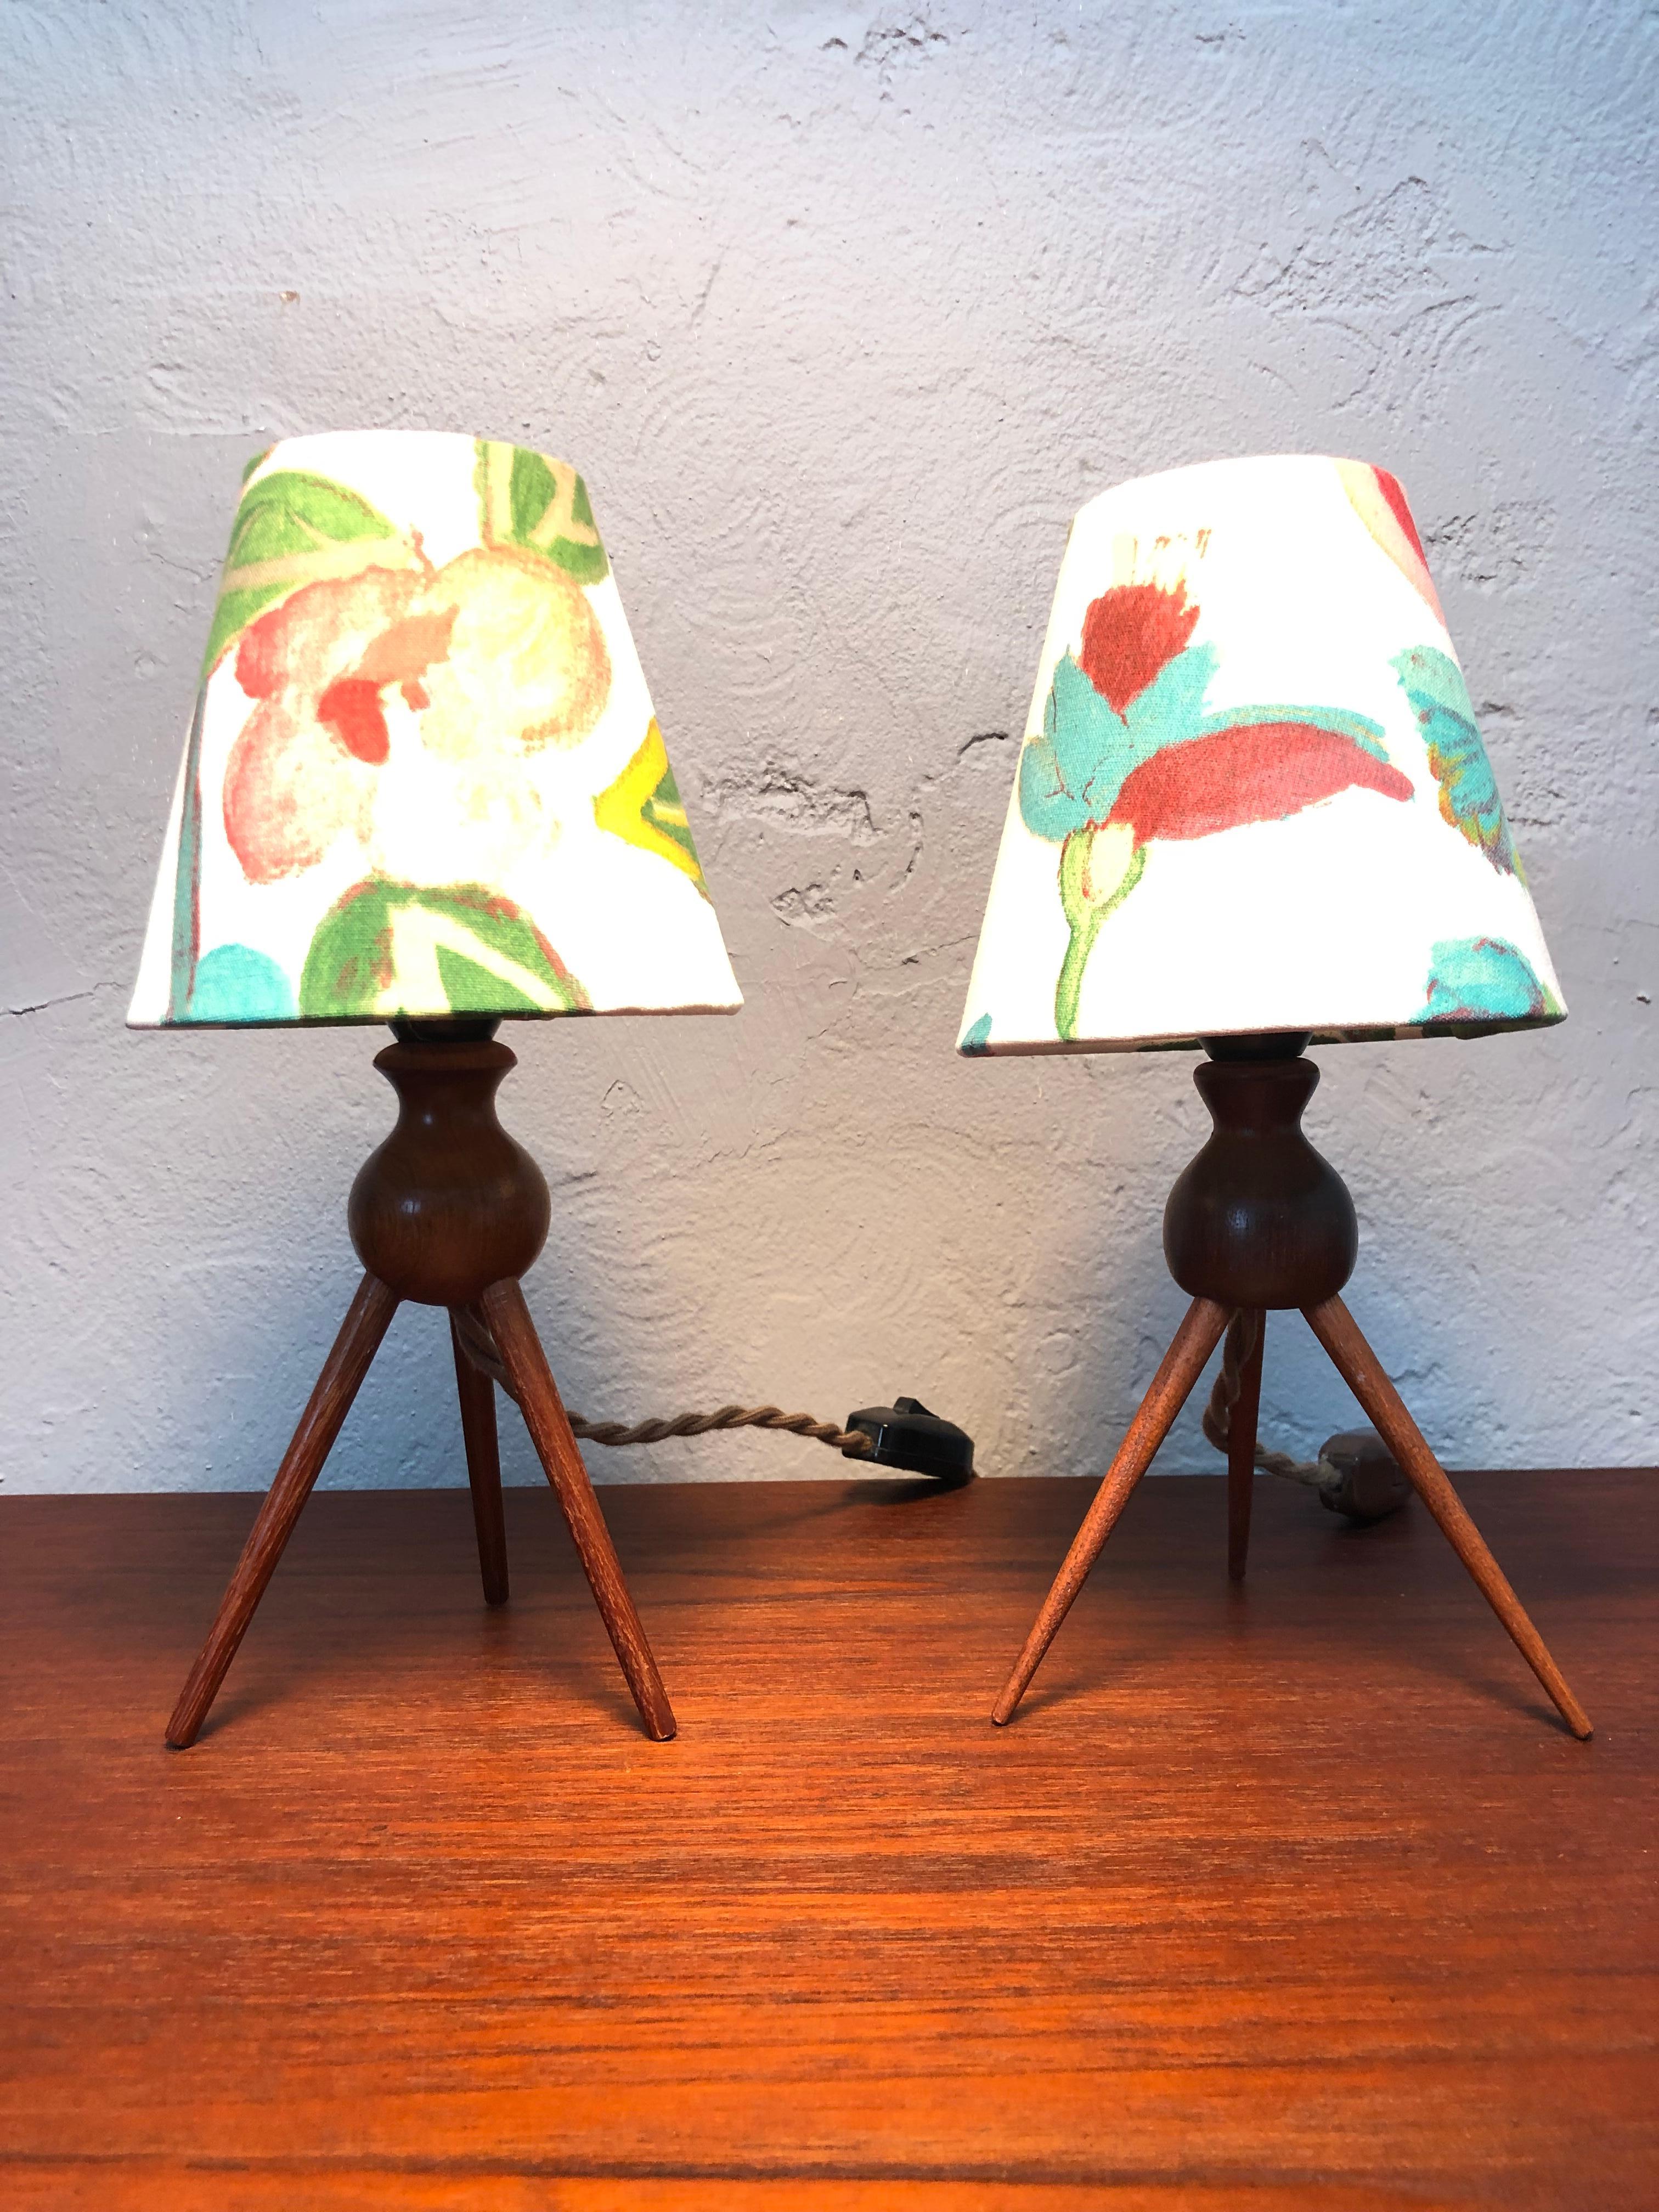 A pair of vintage Danish midcentury teak 3-legged table lamps.
With Gallery Sixty One lamp shades included. 
Solid teak turned legs and body. 
Can be fitted with a US or EU plug.
Great as bedside table lamps. 